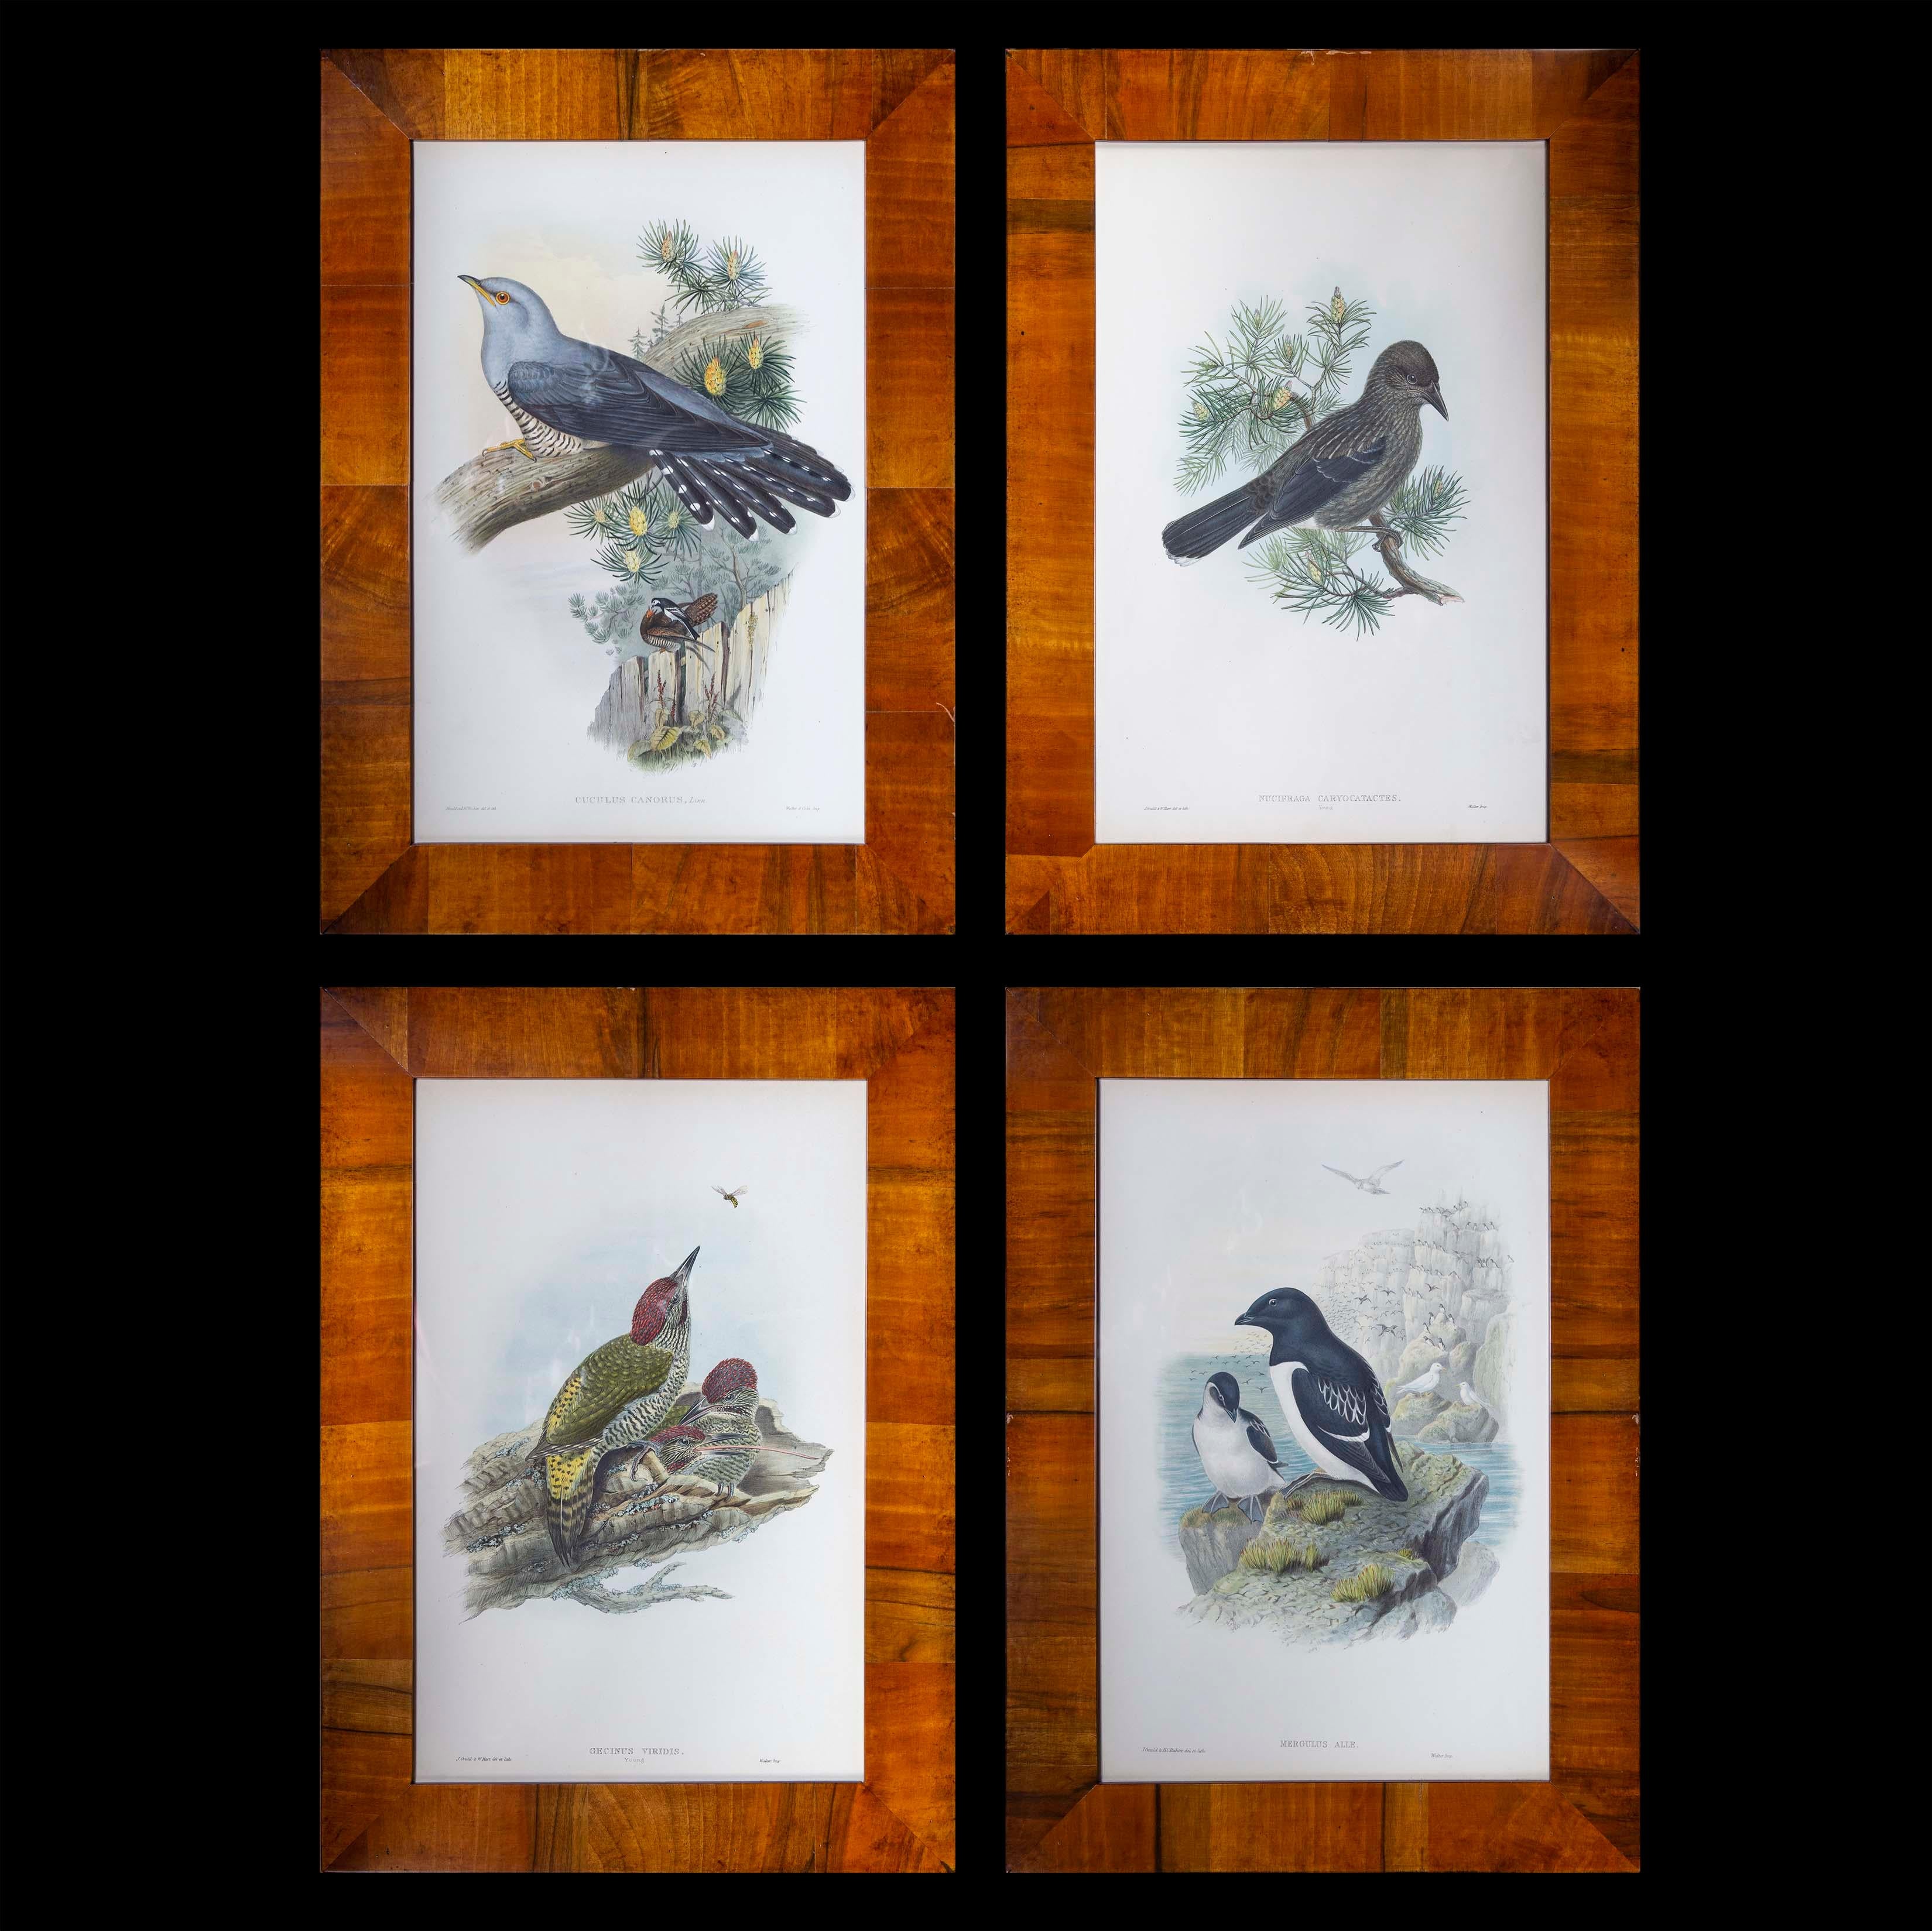 A set of four of exceptional quality 19th century hand-coloured lithographs, in beautiful early 20th century walnut frames

By John Gould (1804-1881), from The Birds of Great Britain, London: Taylor and Francis, 1862–1873

Why we like